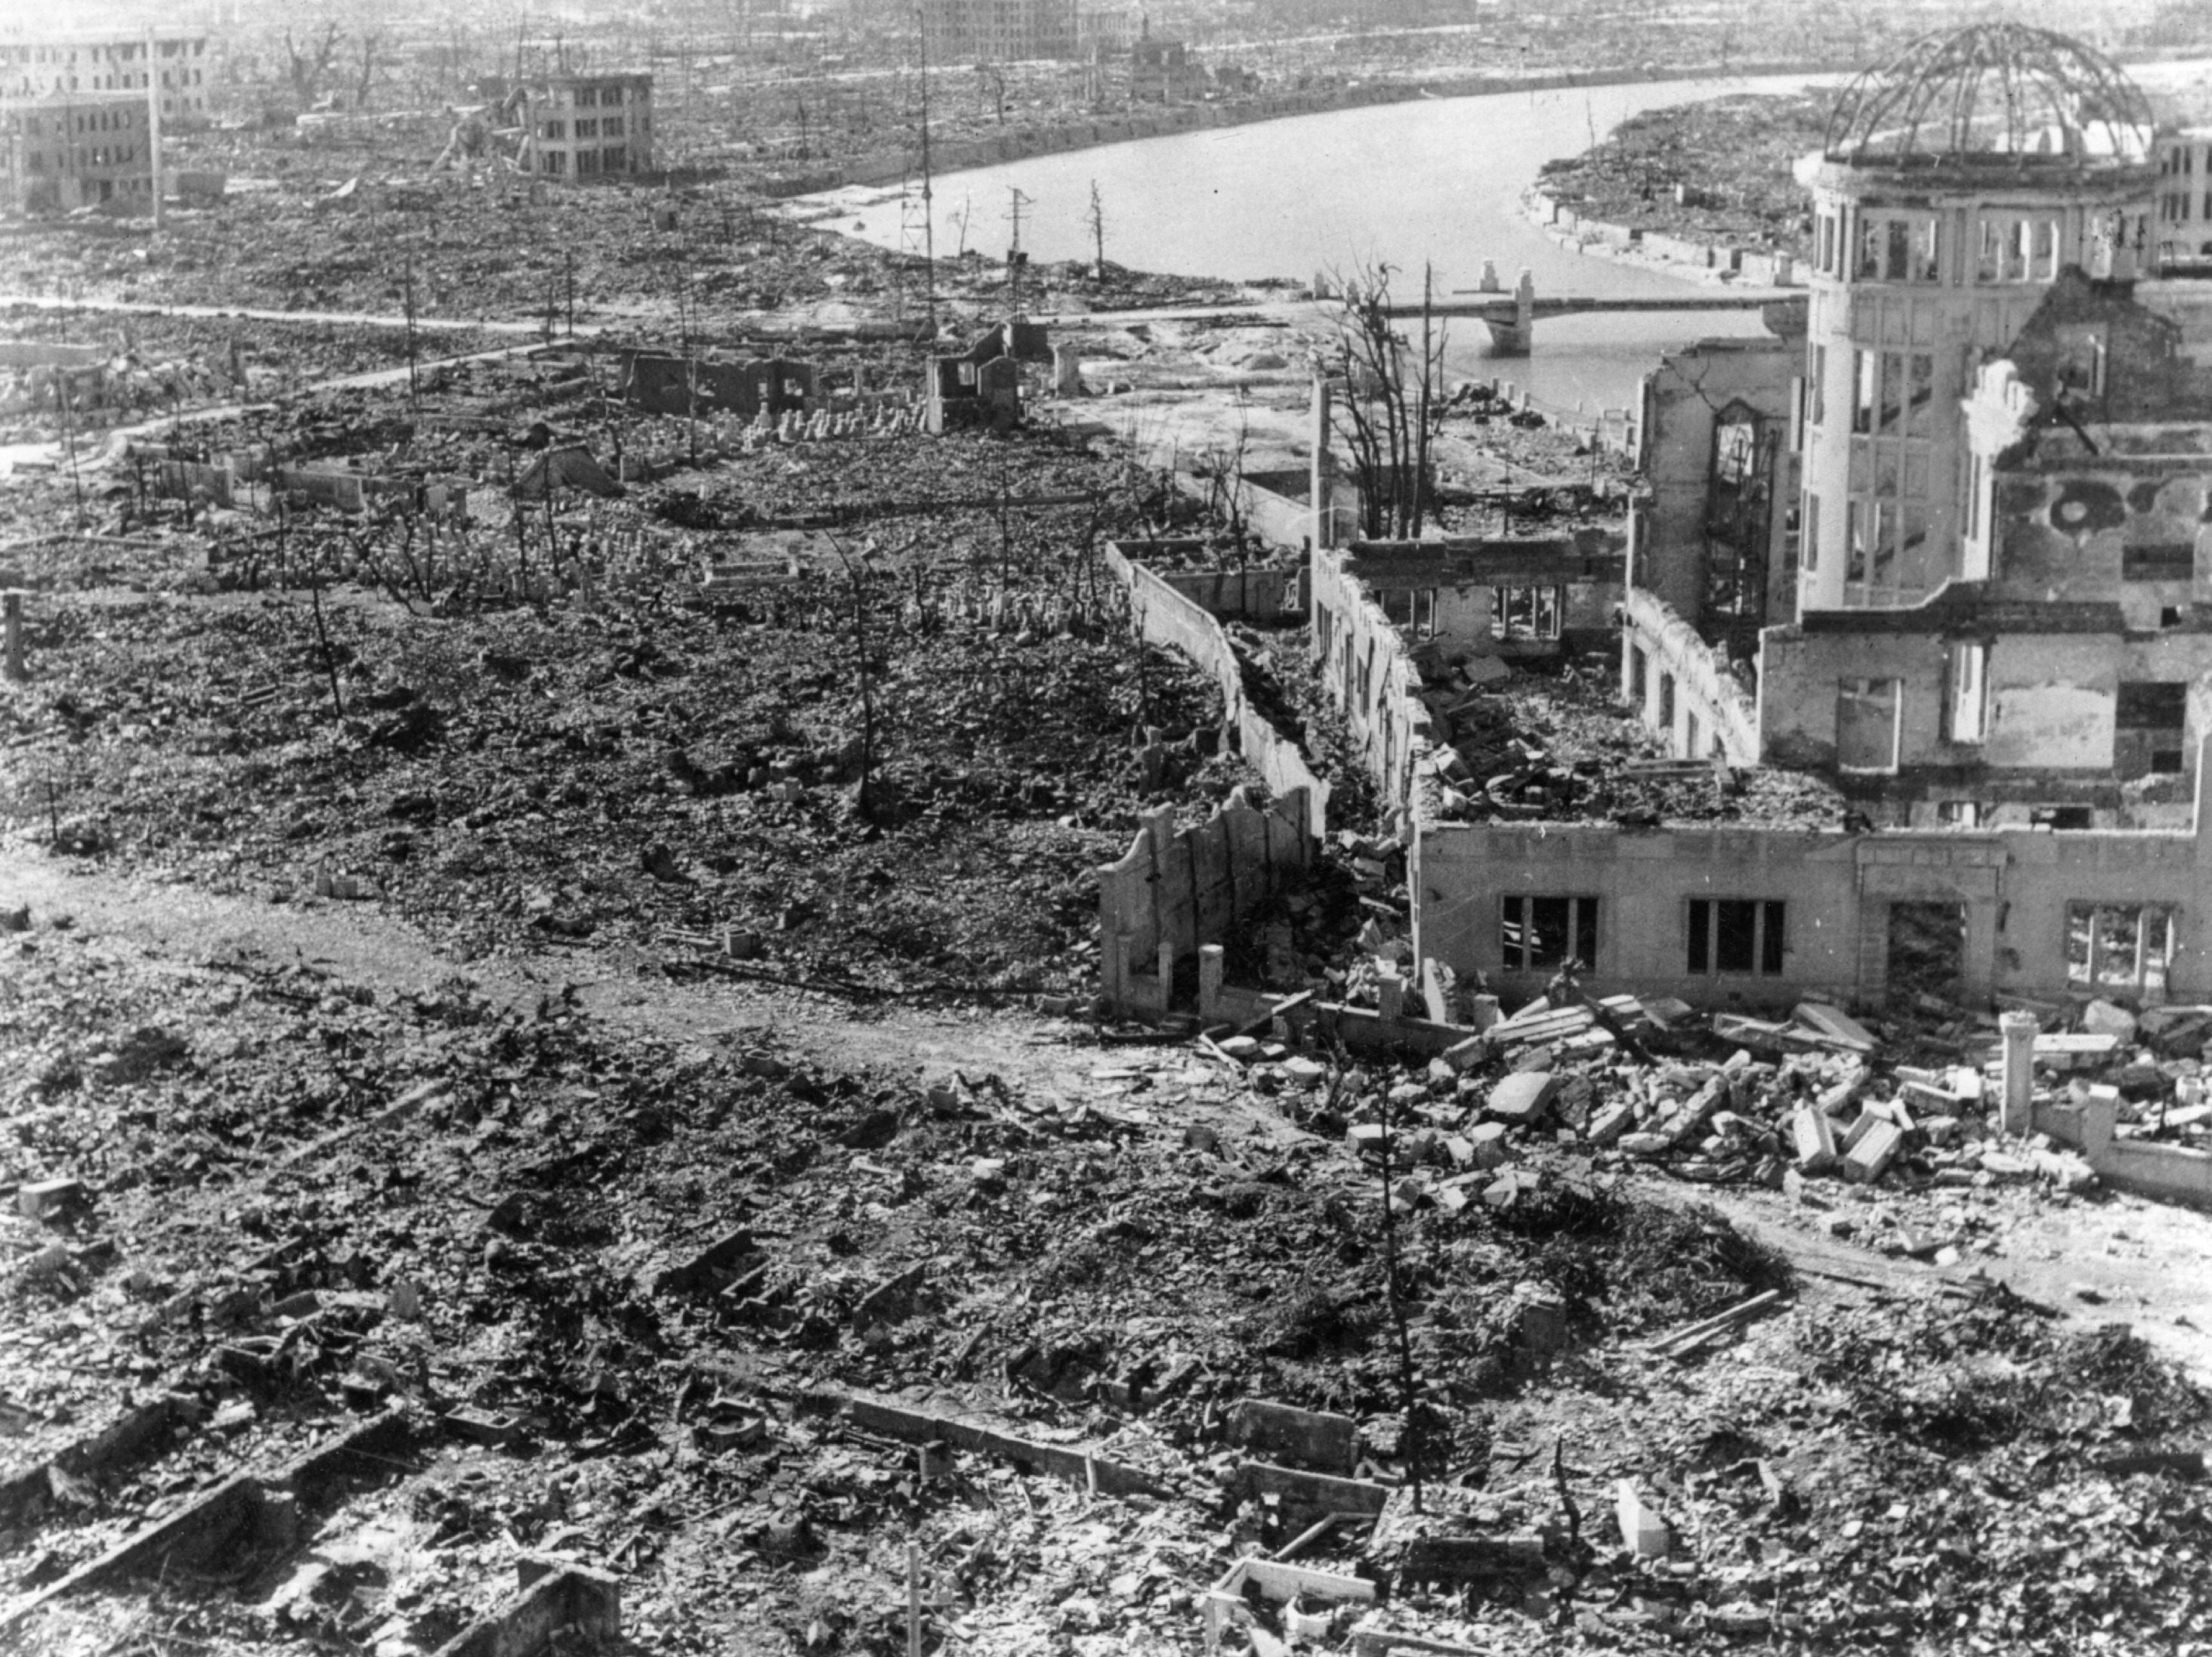 What was left of the city of Hiroshima after the atomic bomb